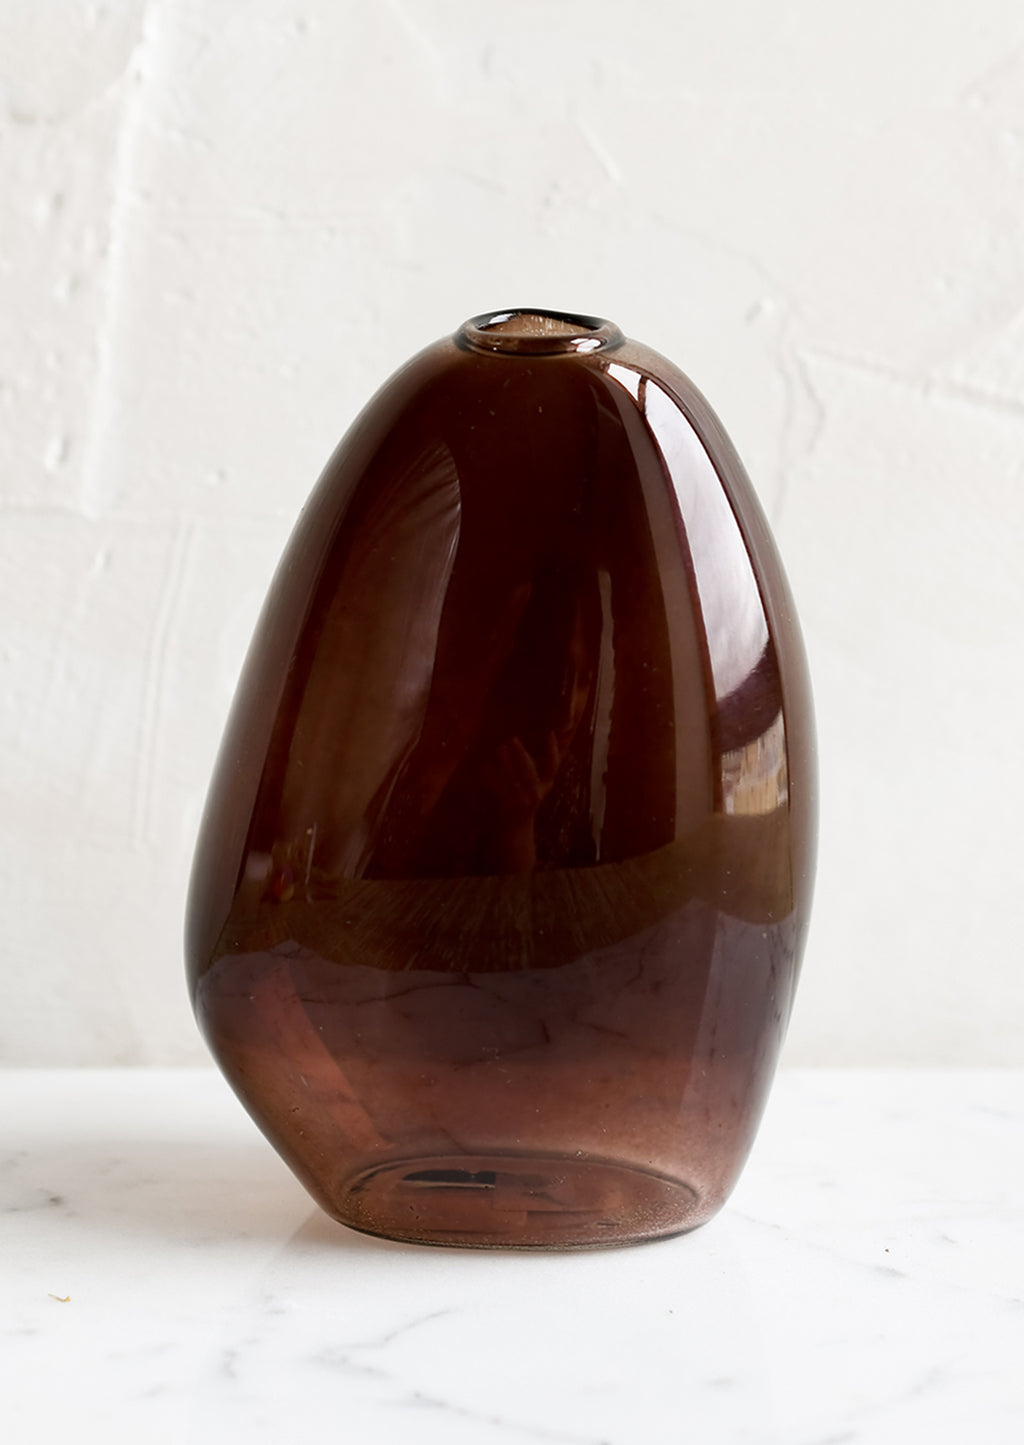 1: An asymmetrical bud vase in brown colored glass.